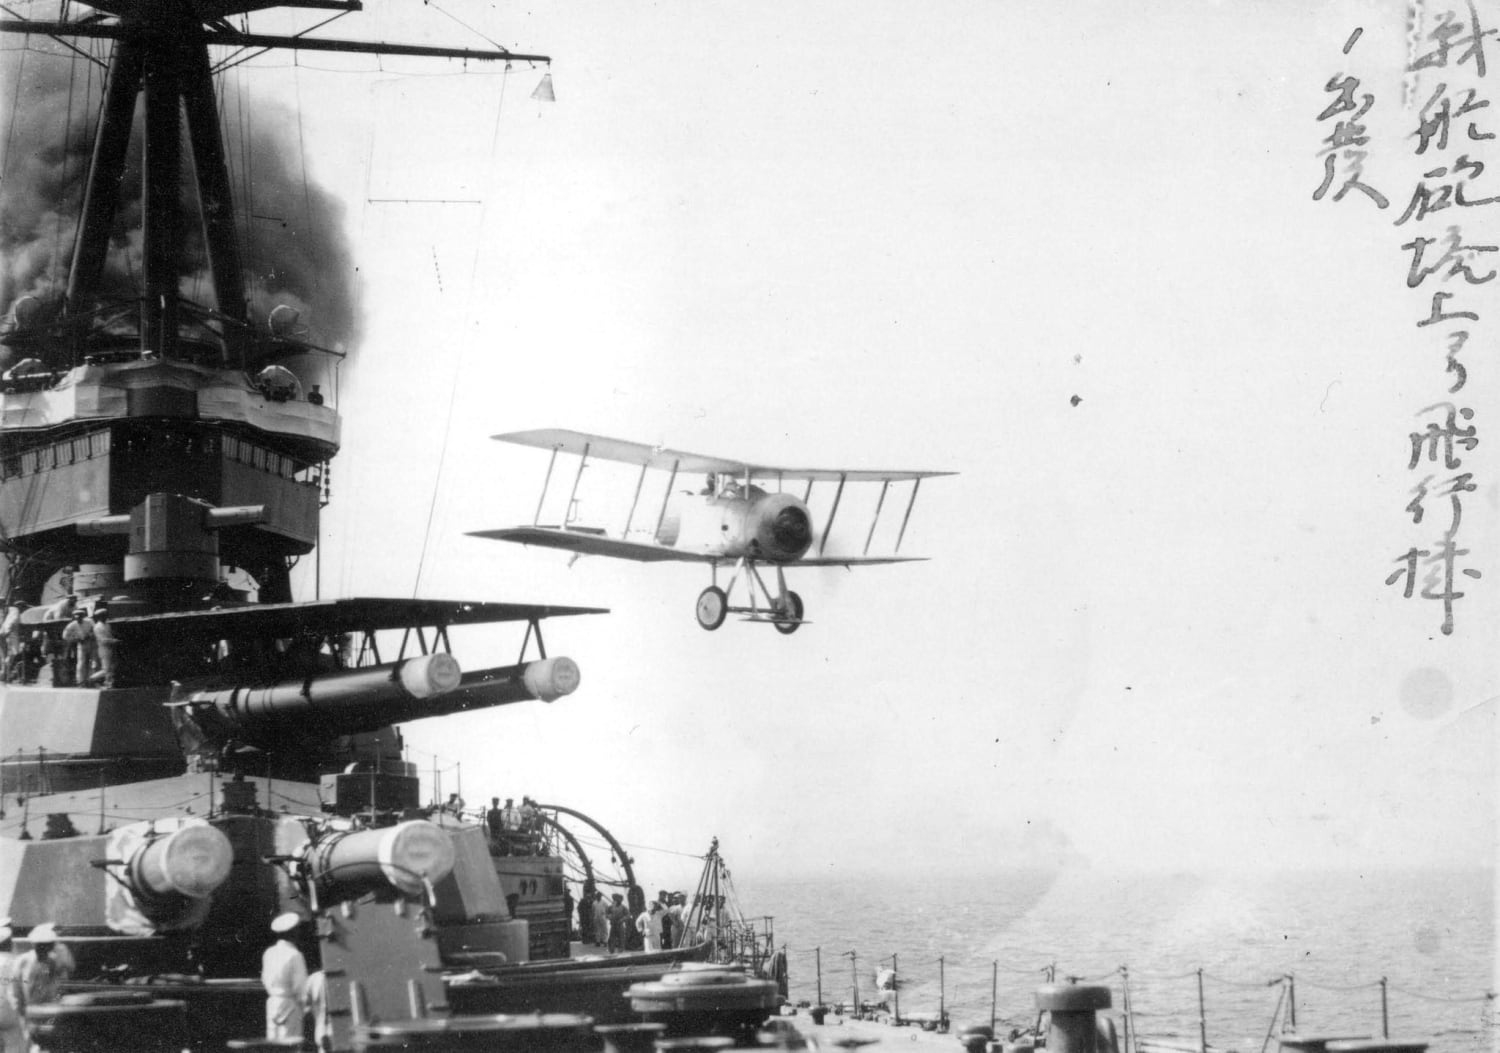 A British-designed Gloster Sparrowhawk aircraft taking off from the B turret platform of the IJN battleship Yamashiro off Yokosuka, Japan, which is considered perhaps the eminent naval power on earth.